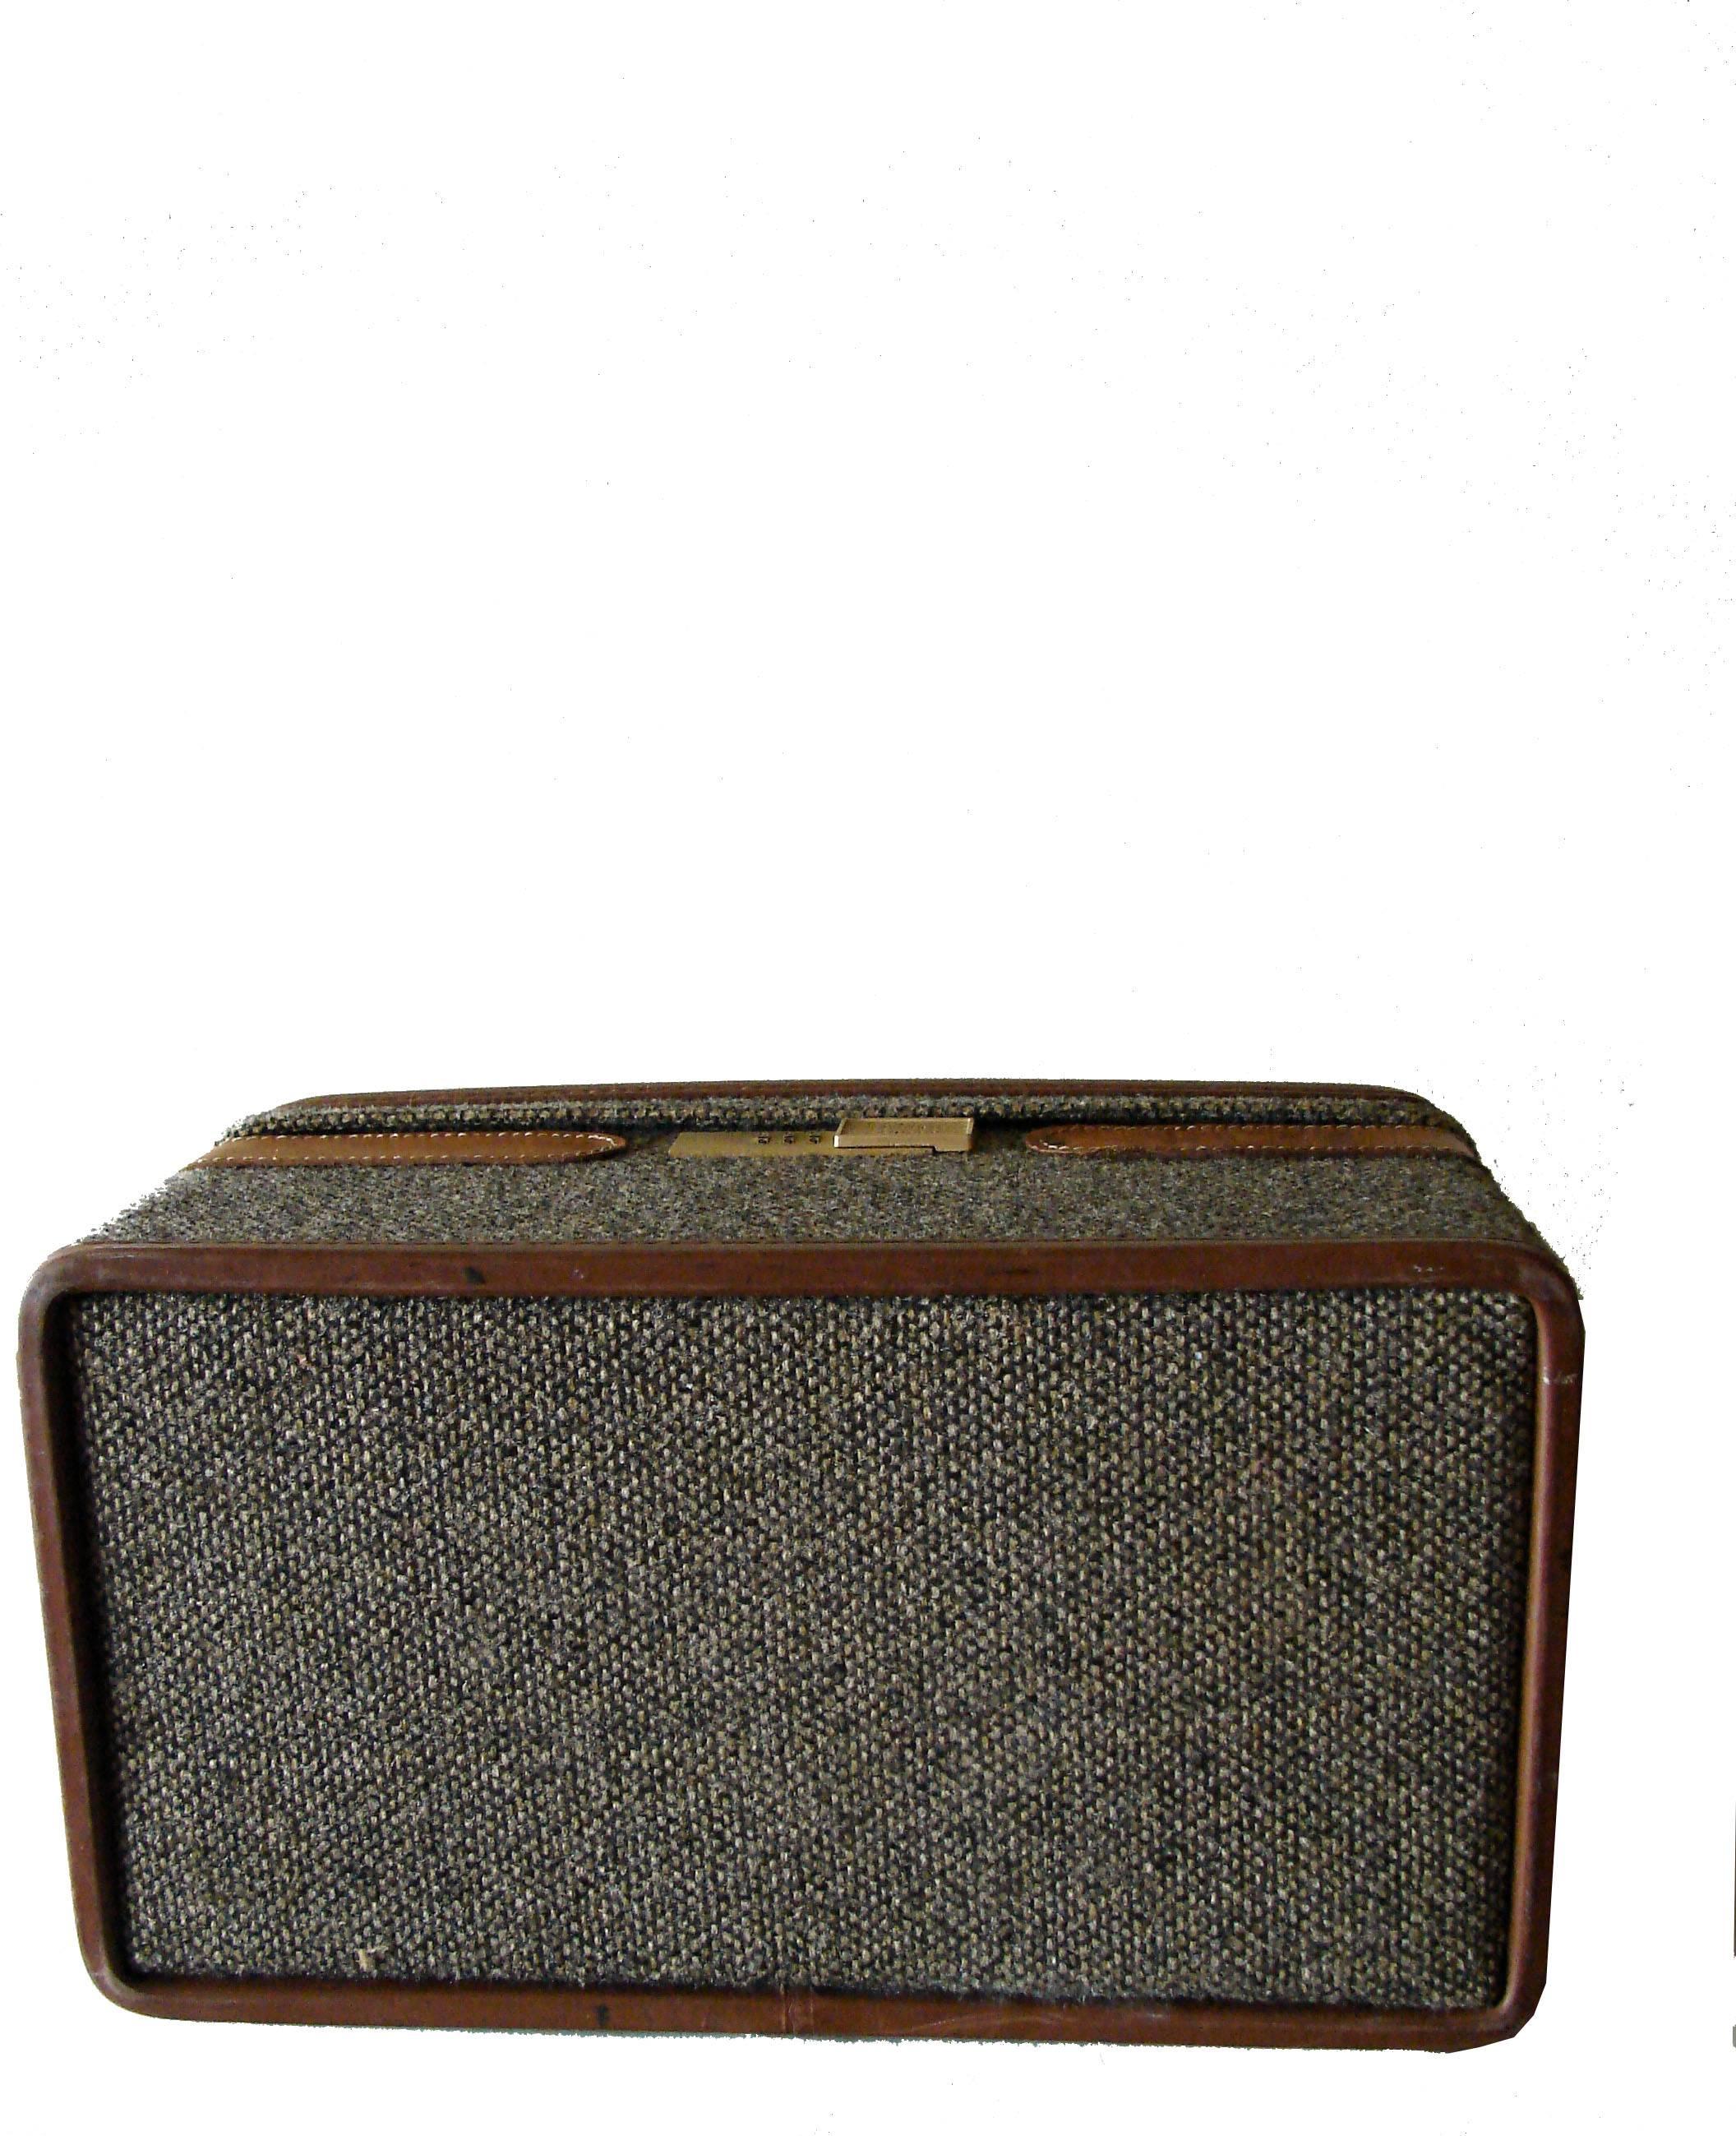 1970s Hartmann Tweed + Leather Train Case with Toile Lining + Adjustable Strap  3